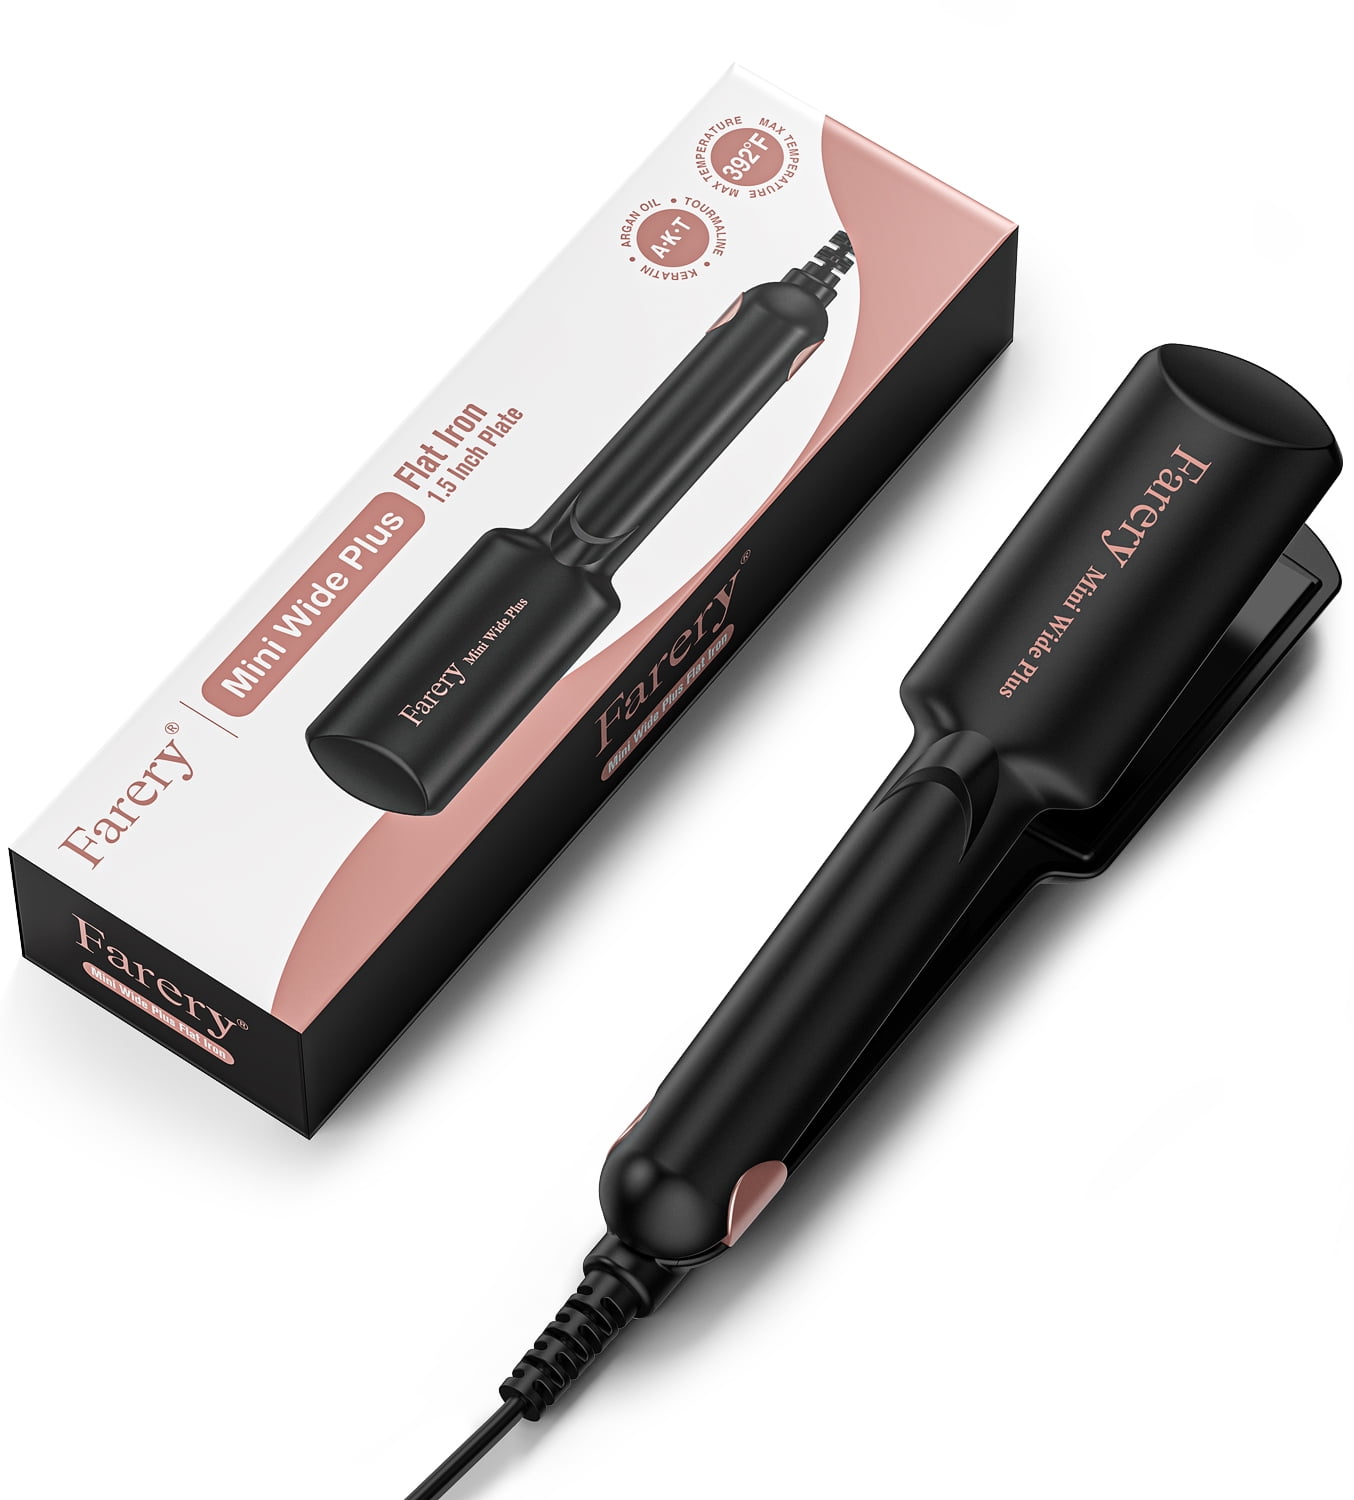 FARERY Mini Flat Iron Portable Travel, 1.5 inch Wide Small Hair Straightener with Dual Voltage, Pink, Size: 3/4